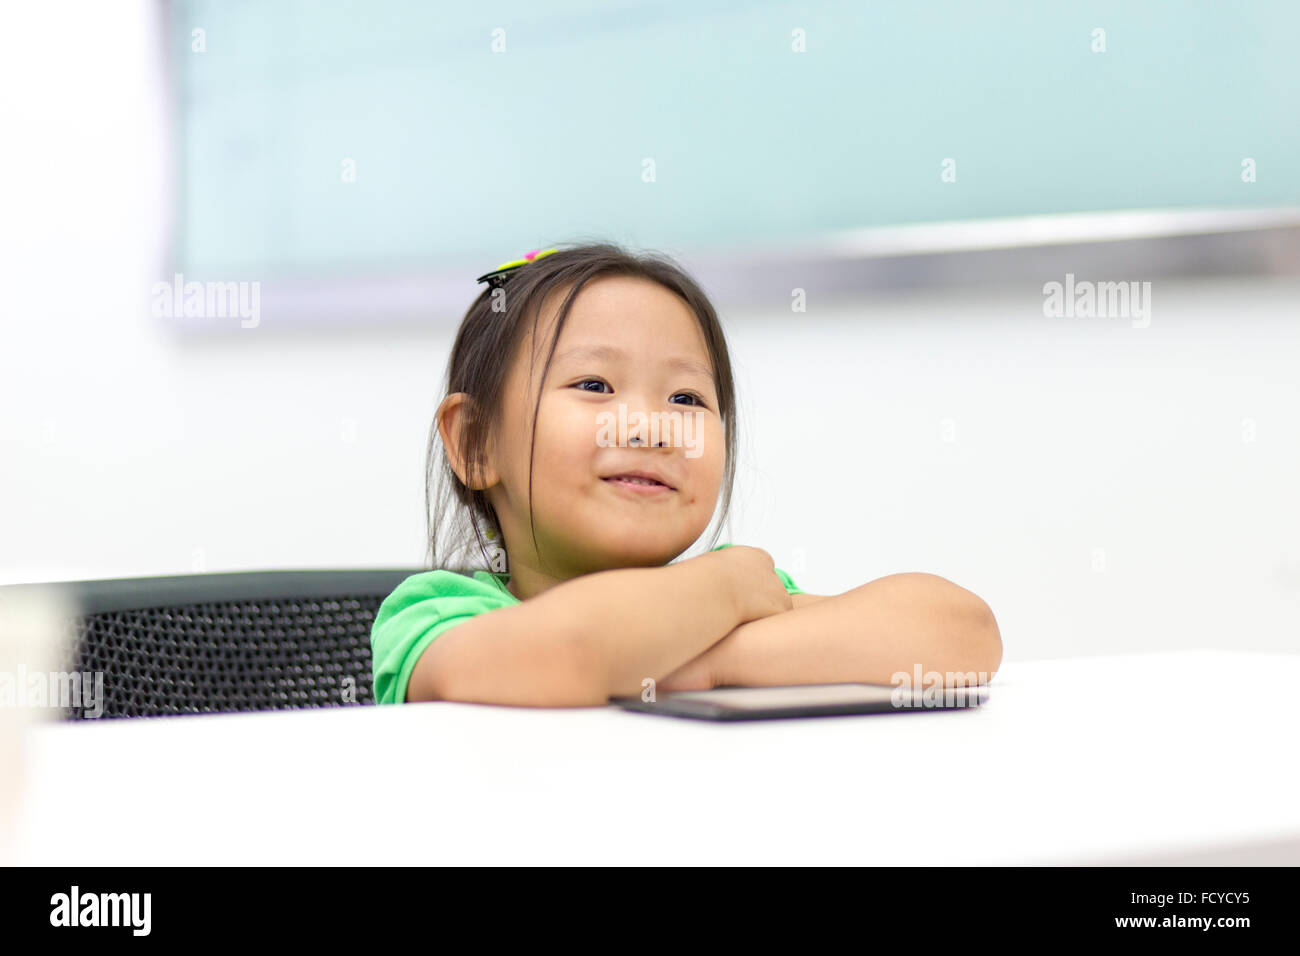 Curious student studying using digital tablet at classroom Stock Photo